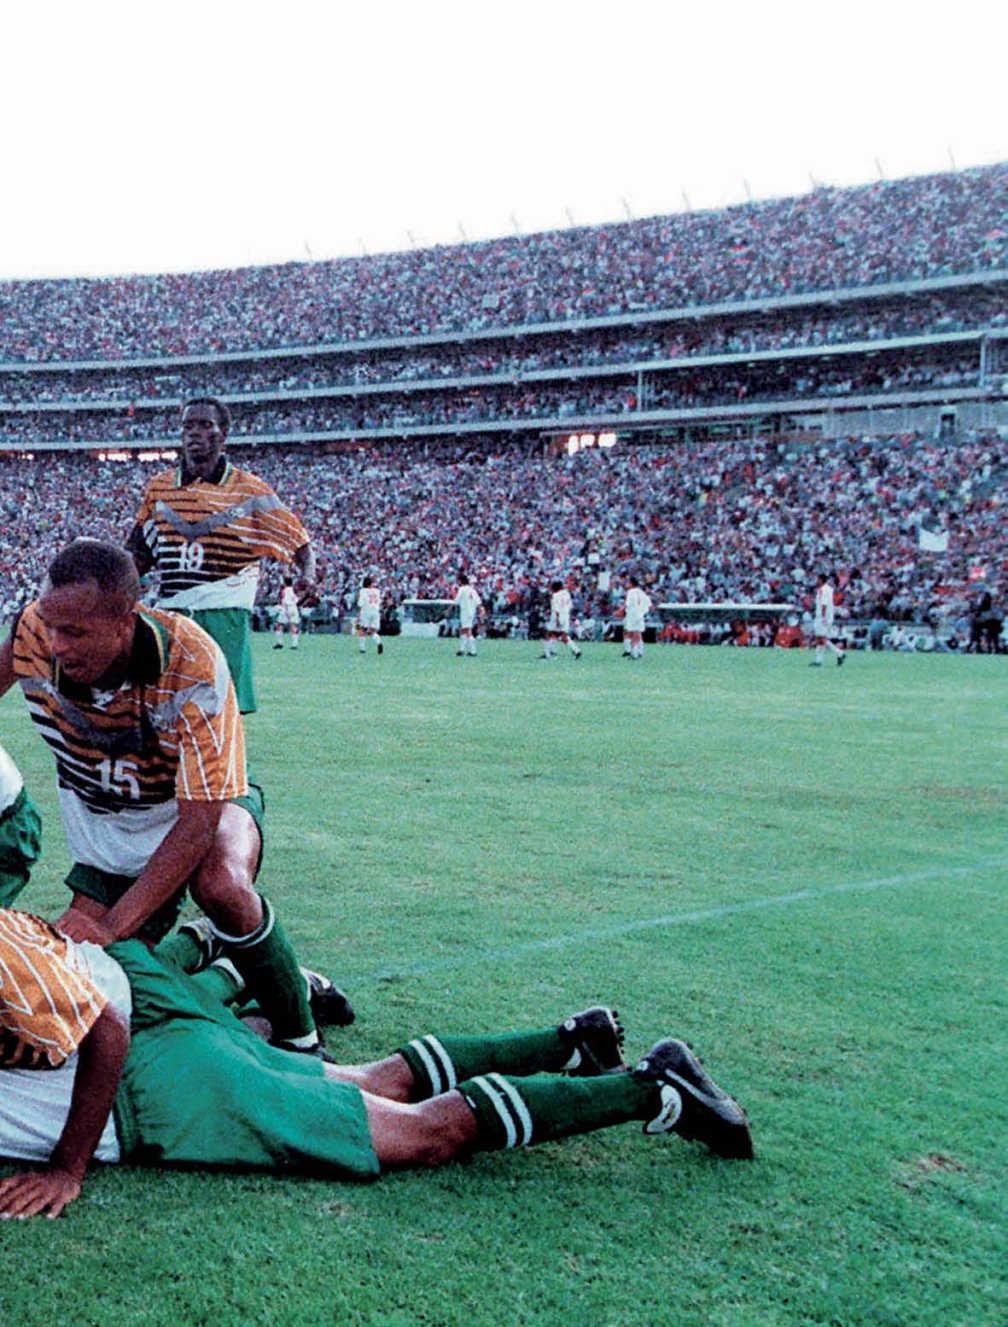 20 YEARS ON RIDING THE WAVE South Africa made it back-to-back wins with a 1-0 success over a determined Angola in wet conditions.